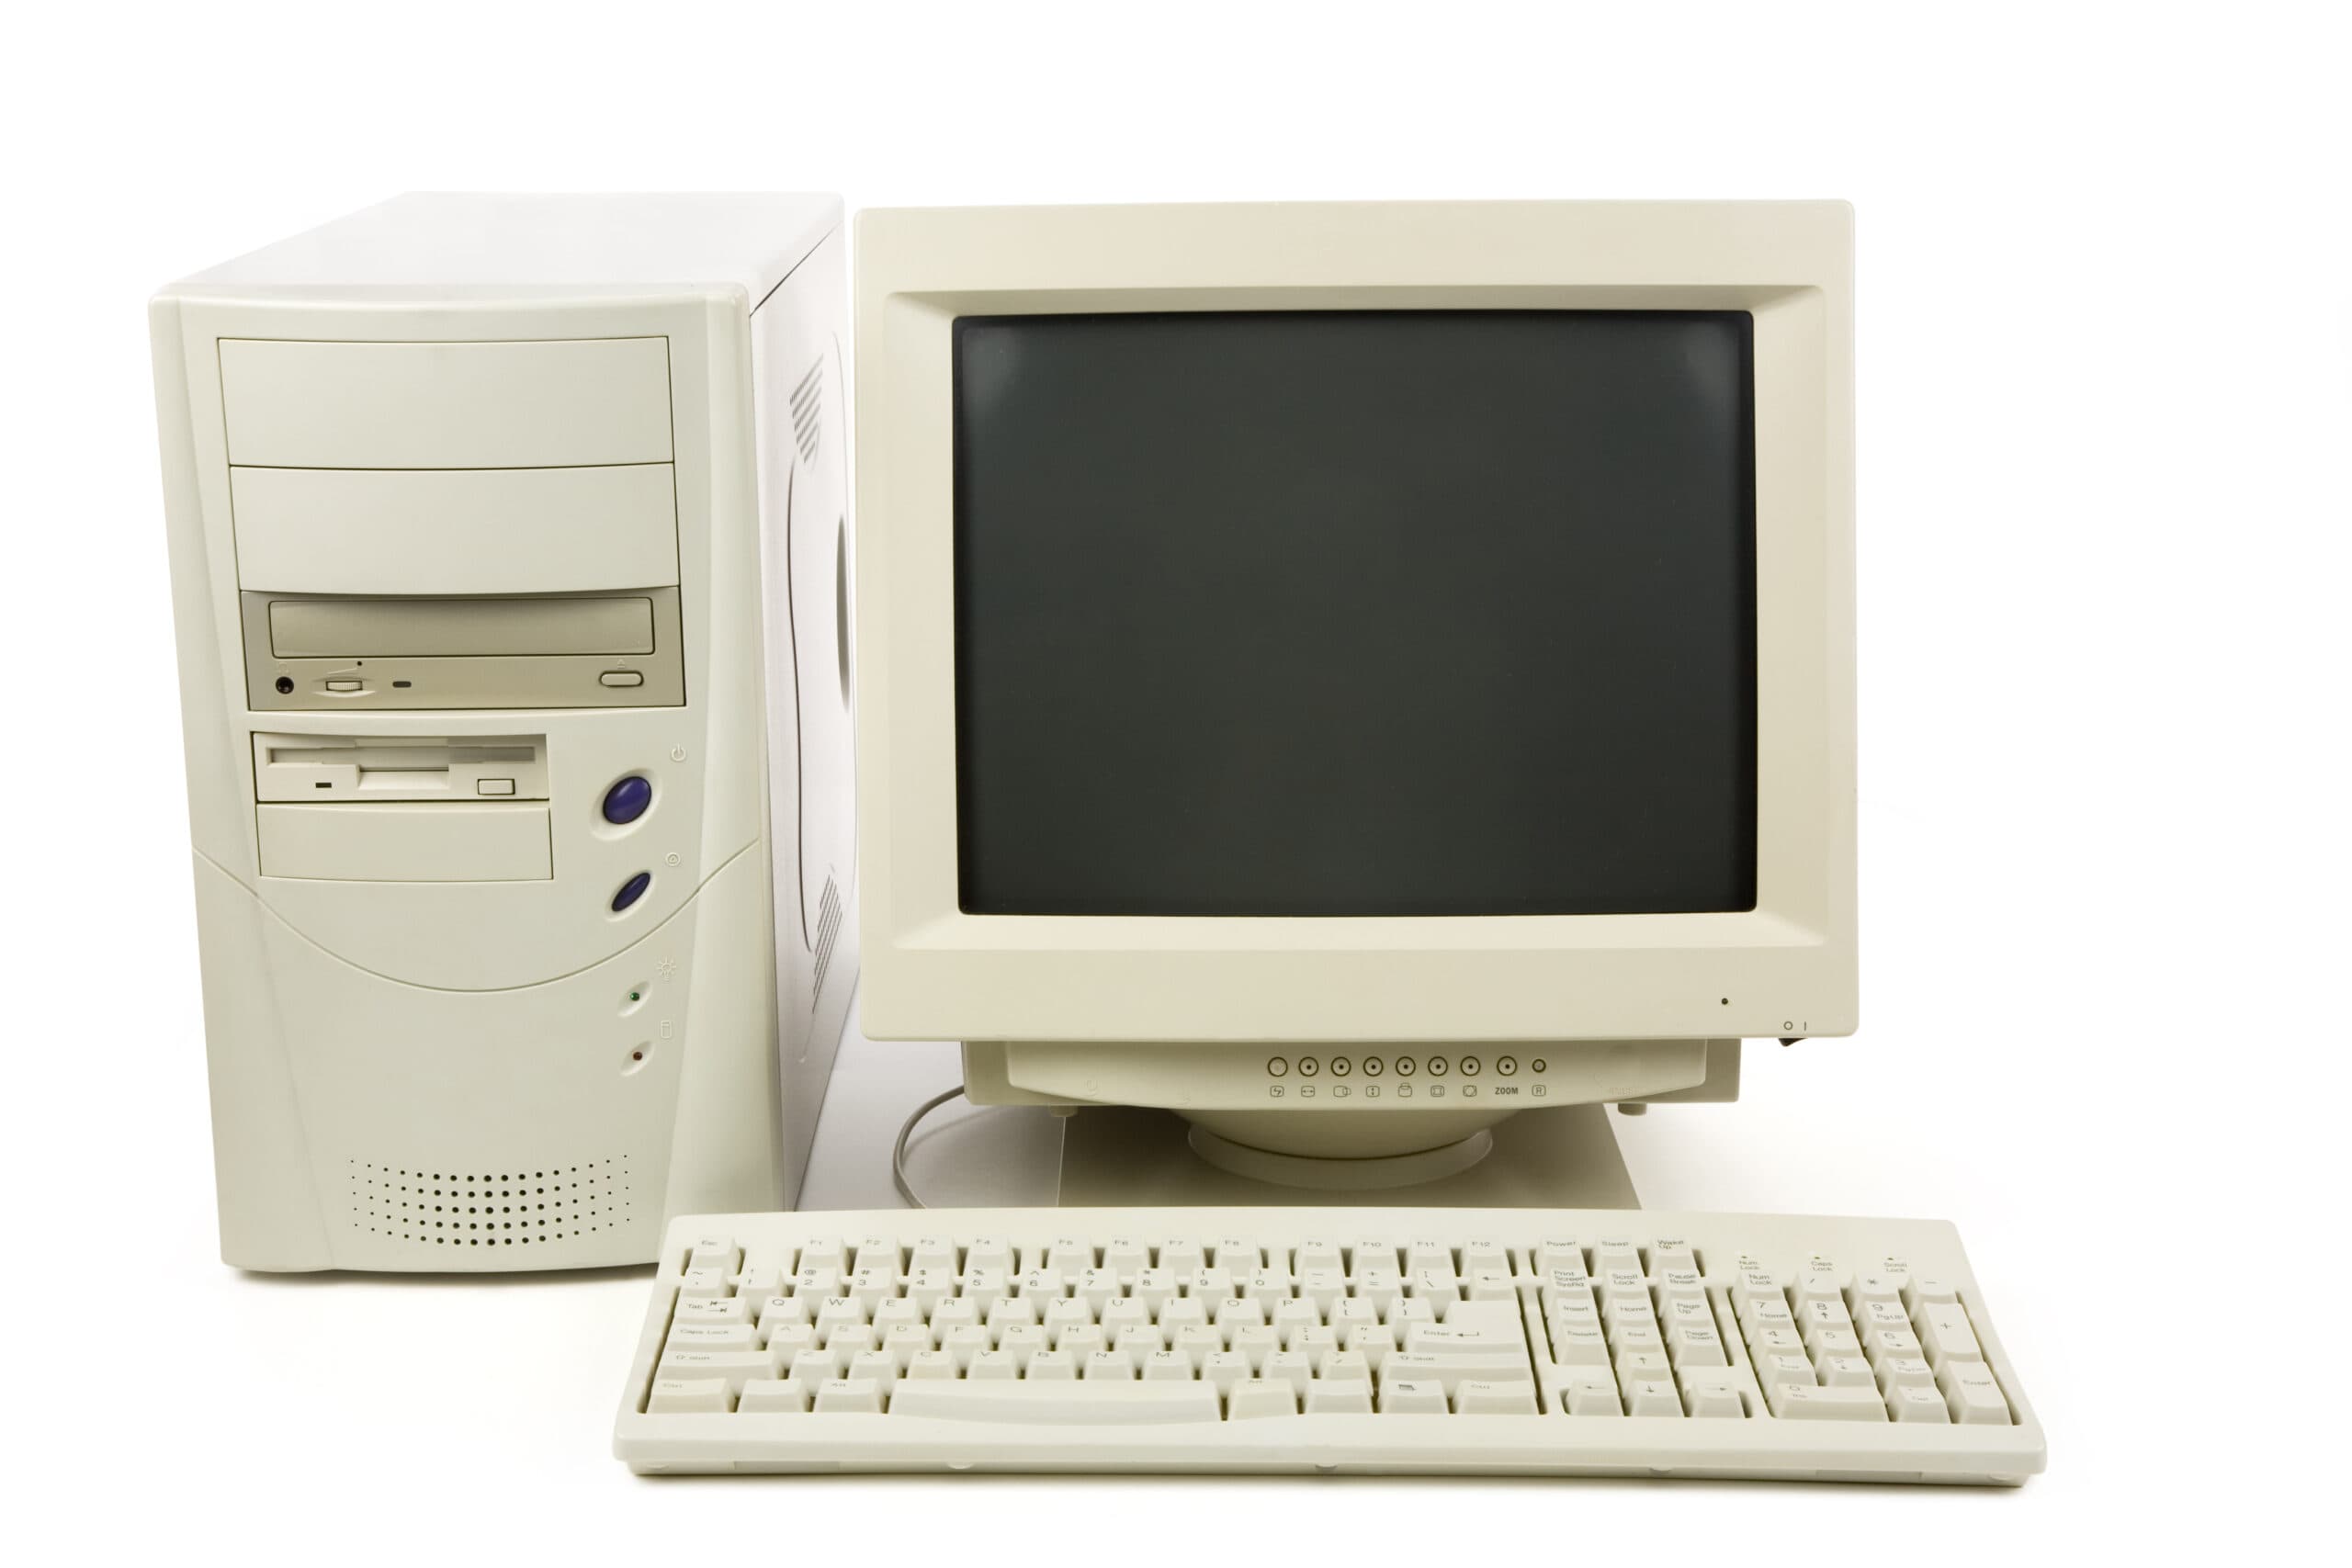 A desktop computer and computer monitor are placed side by side